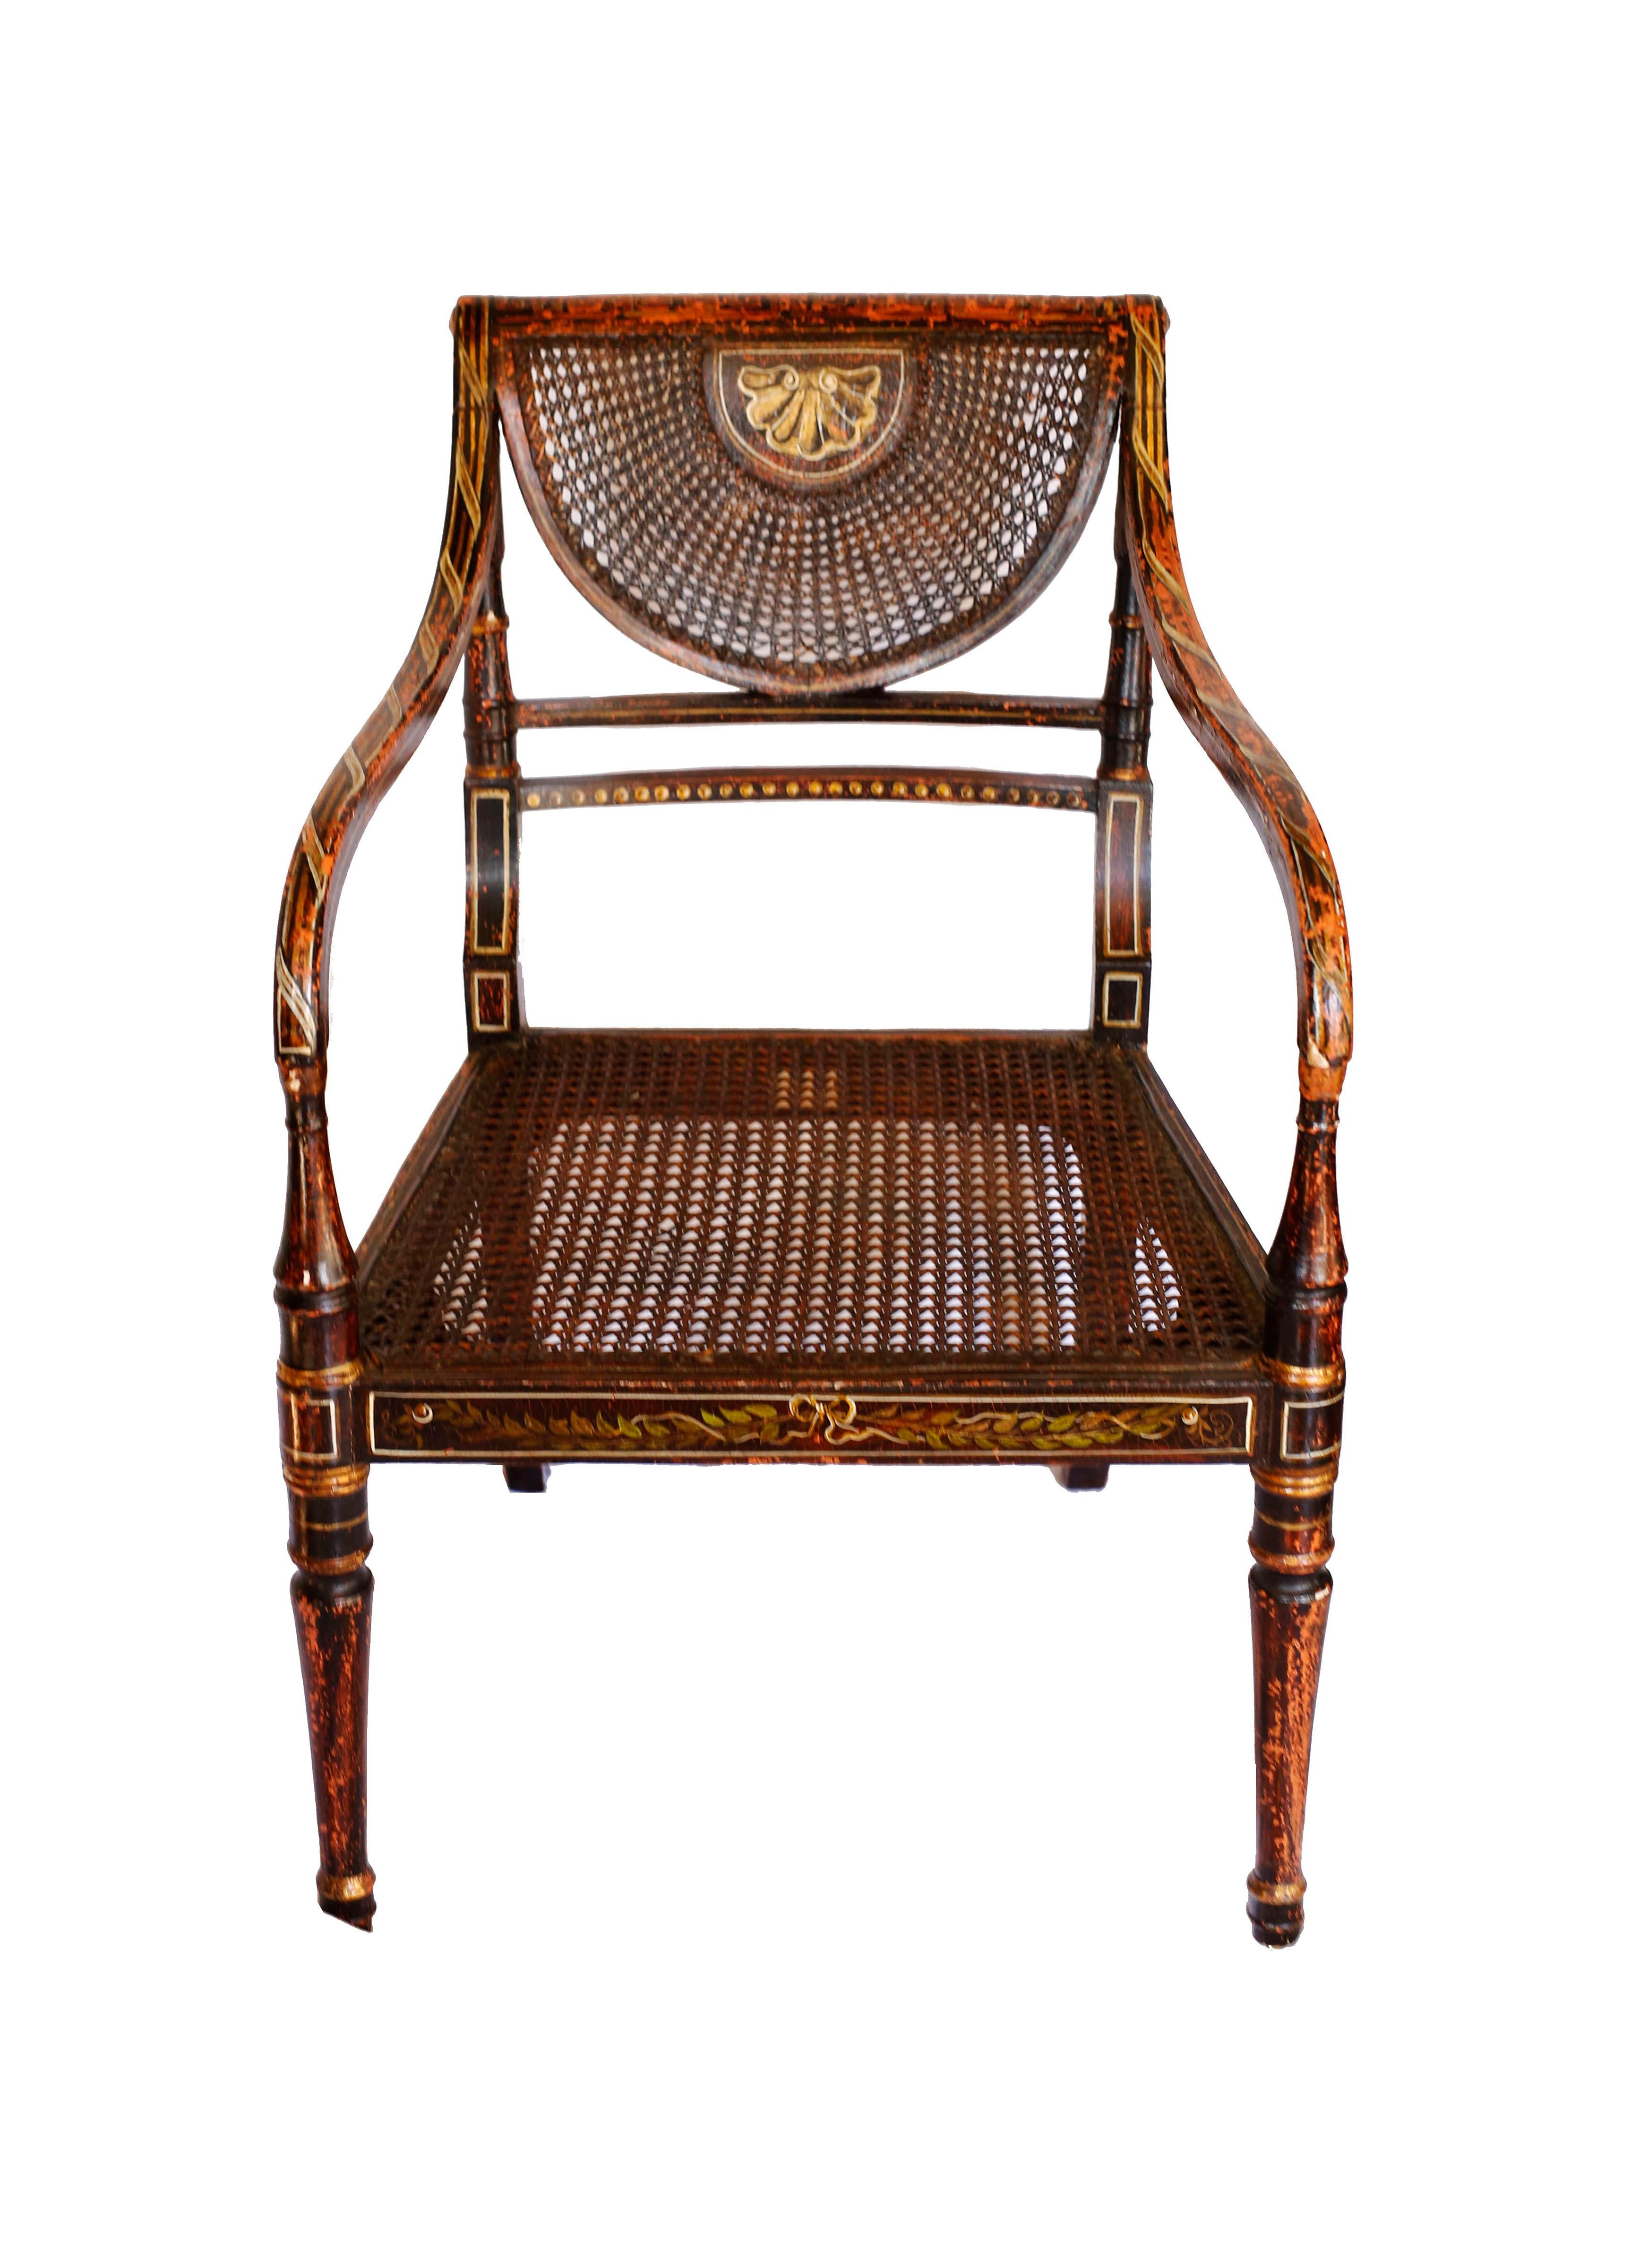 English Early 19th Century Parcel-Gilt Caned Armchair, after Angelica Kauffman